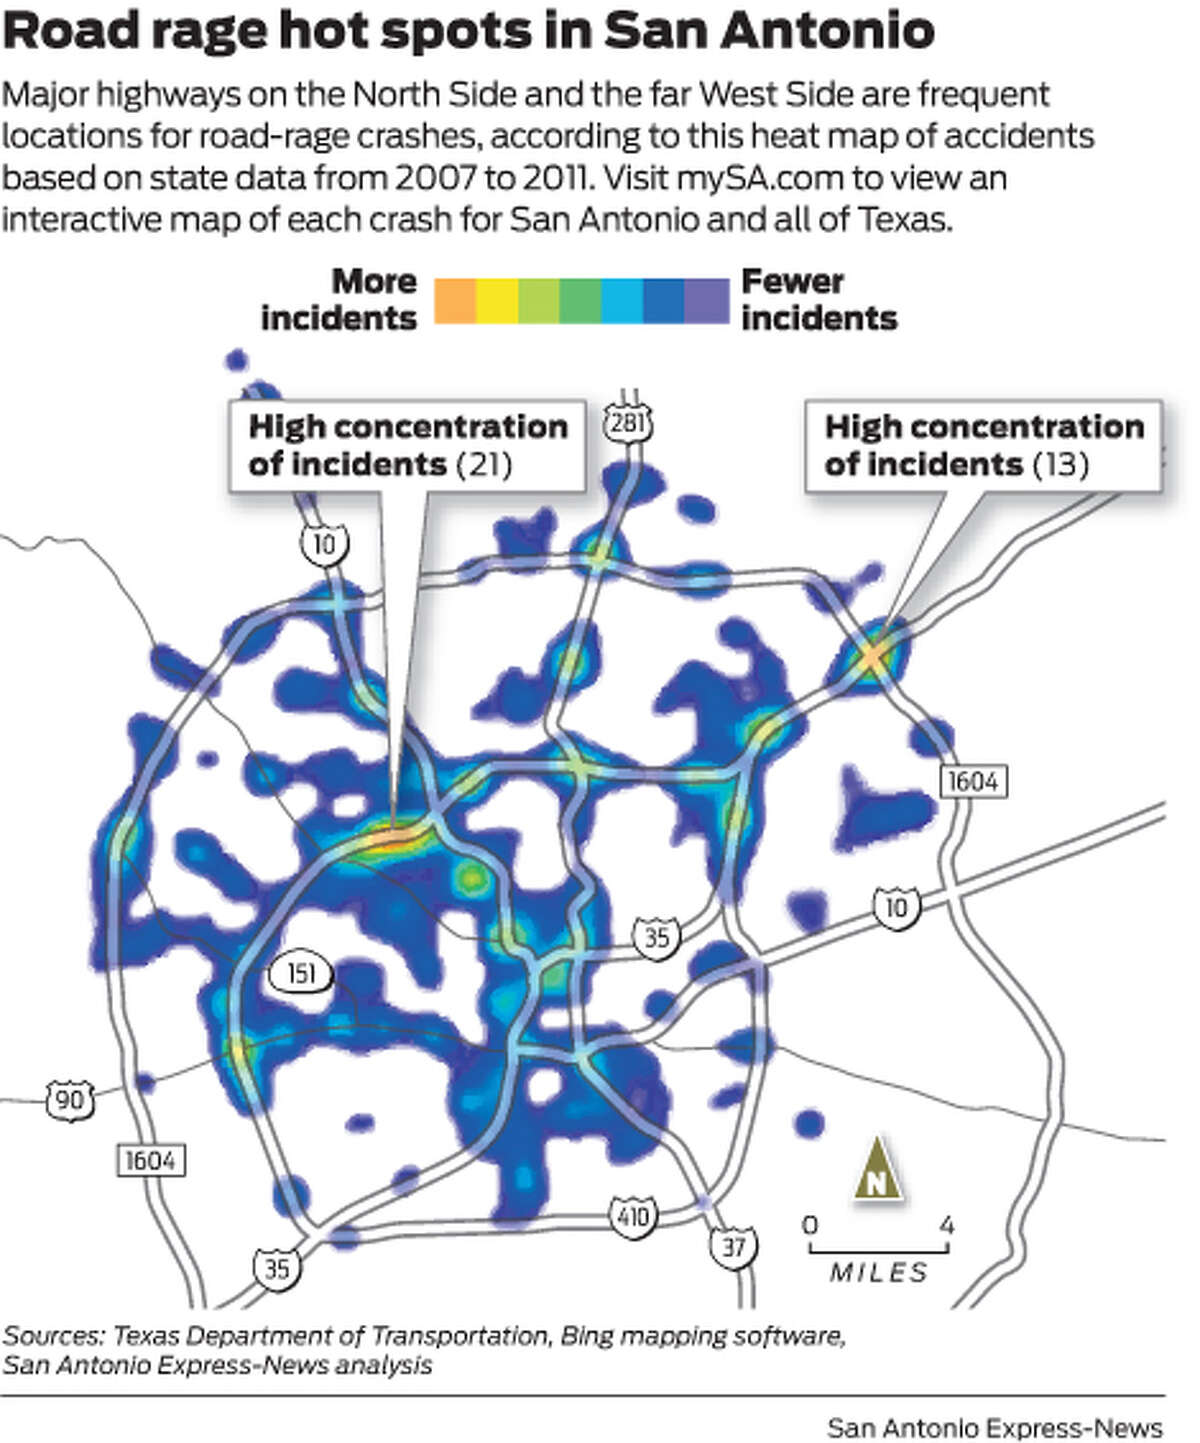 Major highways on the North Side and the far West Side are frequent locations for road-rage crashes, according to this heat map of accidents based on state data from 2007 to 2011. Visit mySA.com to view an interactive map of each crash for San Antonio and all of Texas.